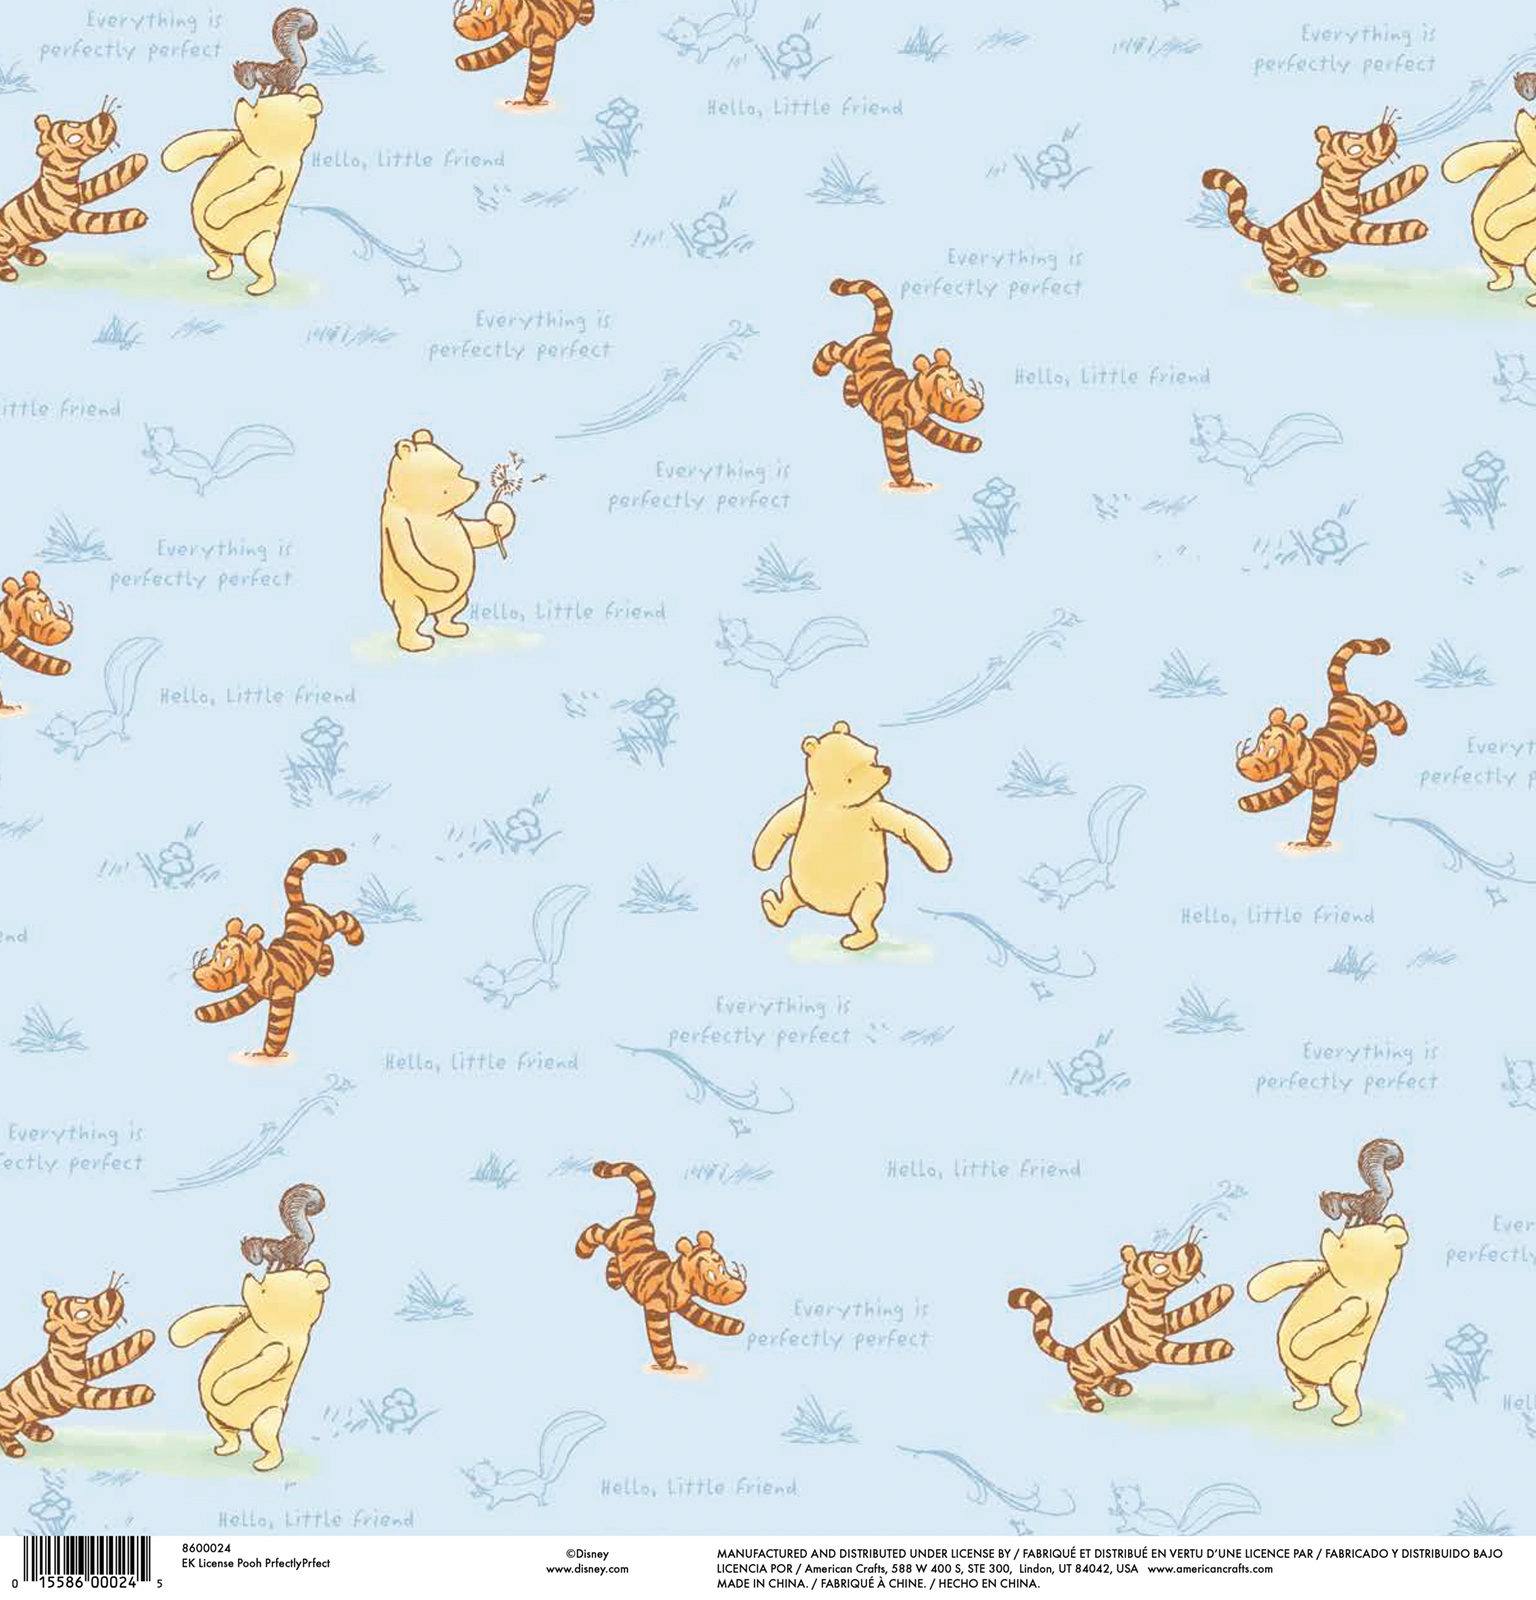 Disney Paper - Pooh Perfectly Perfect